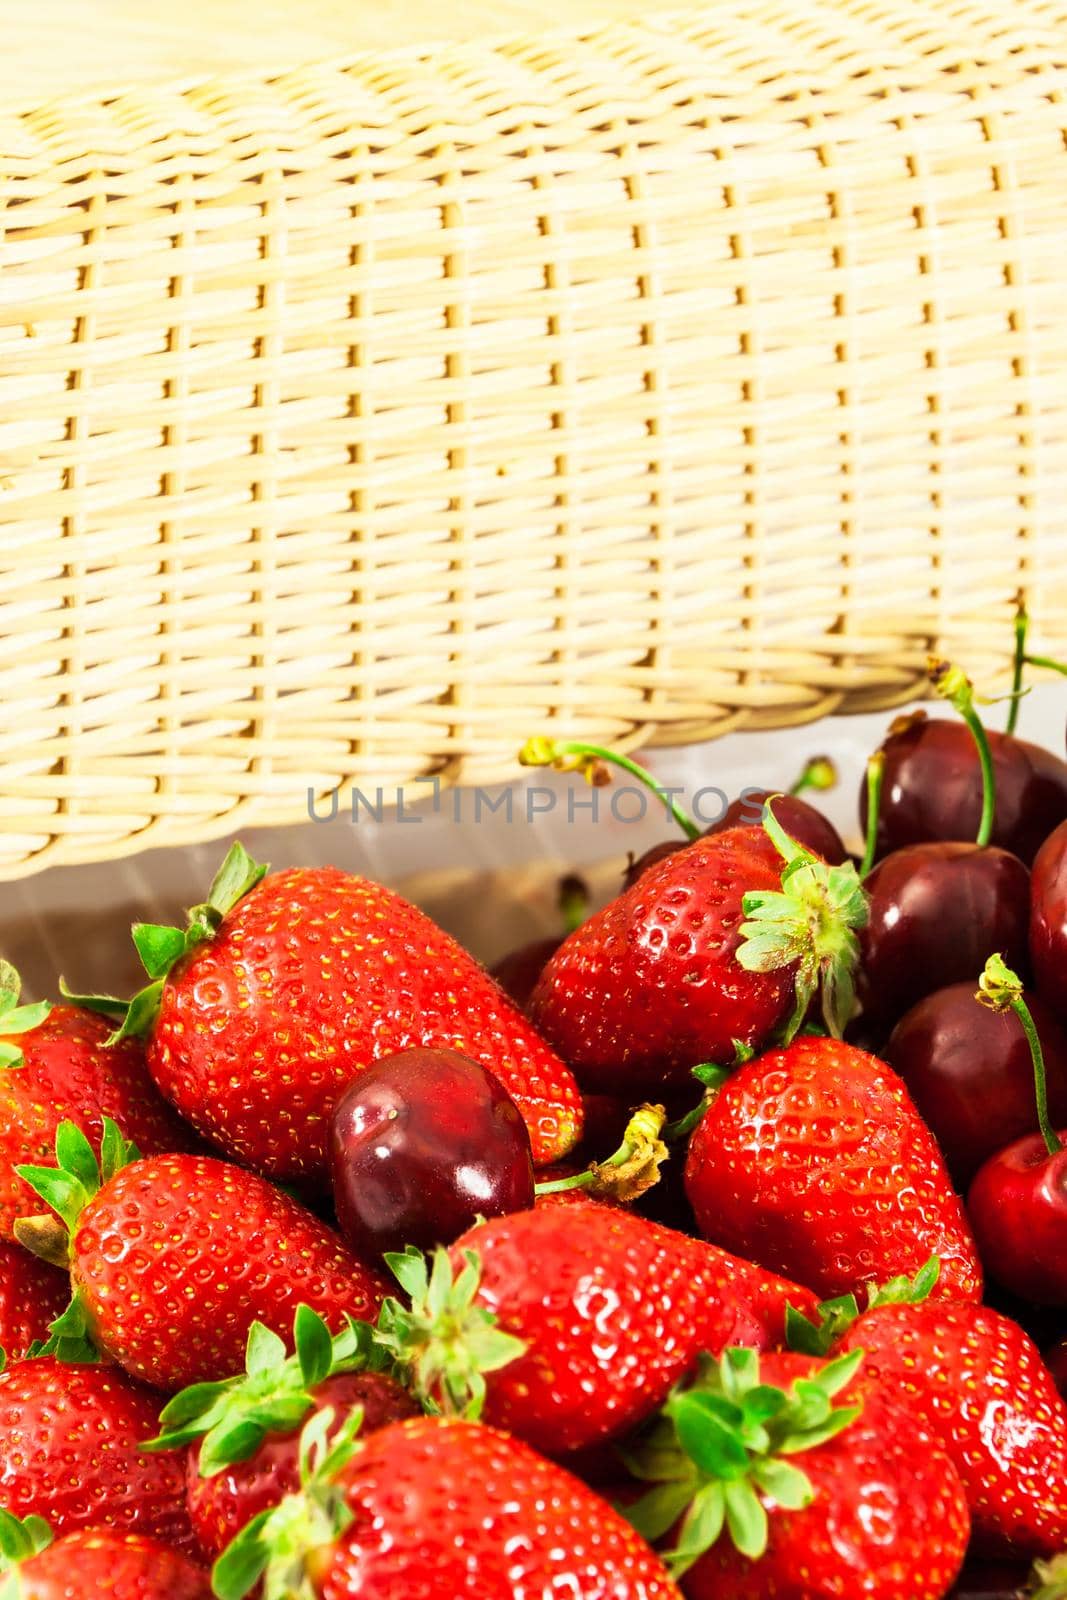 Strawberries and cherries in a wicker basket in the background. Vertical image.